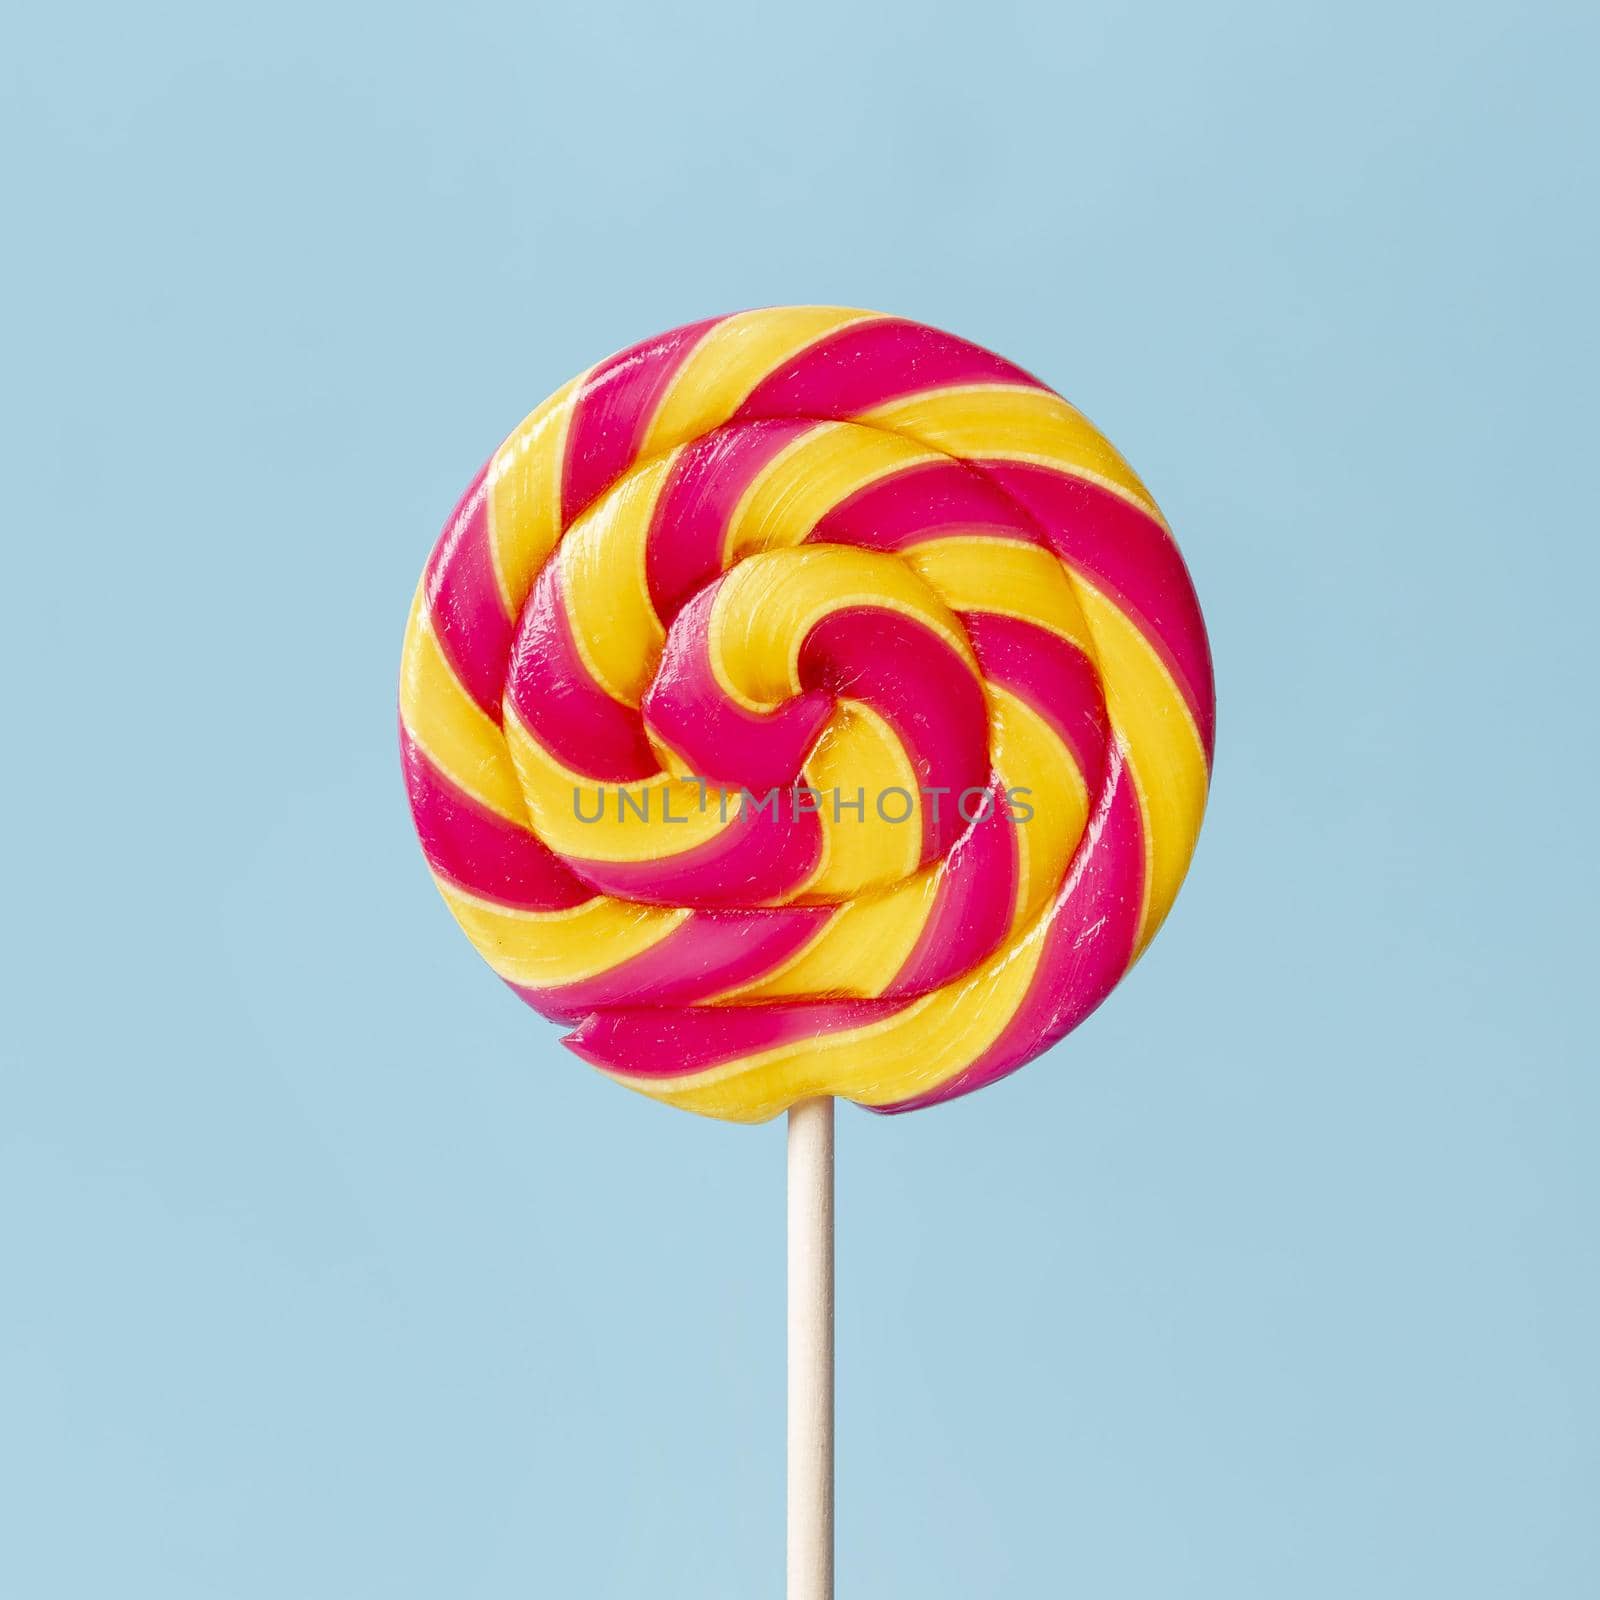 close up view colorful delicious lollipop. High quality beautiful photo concept by Zahard